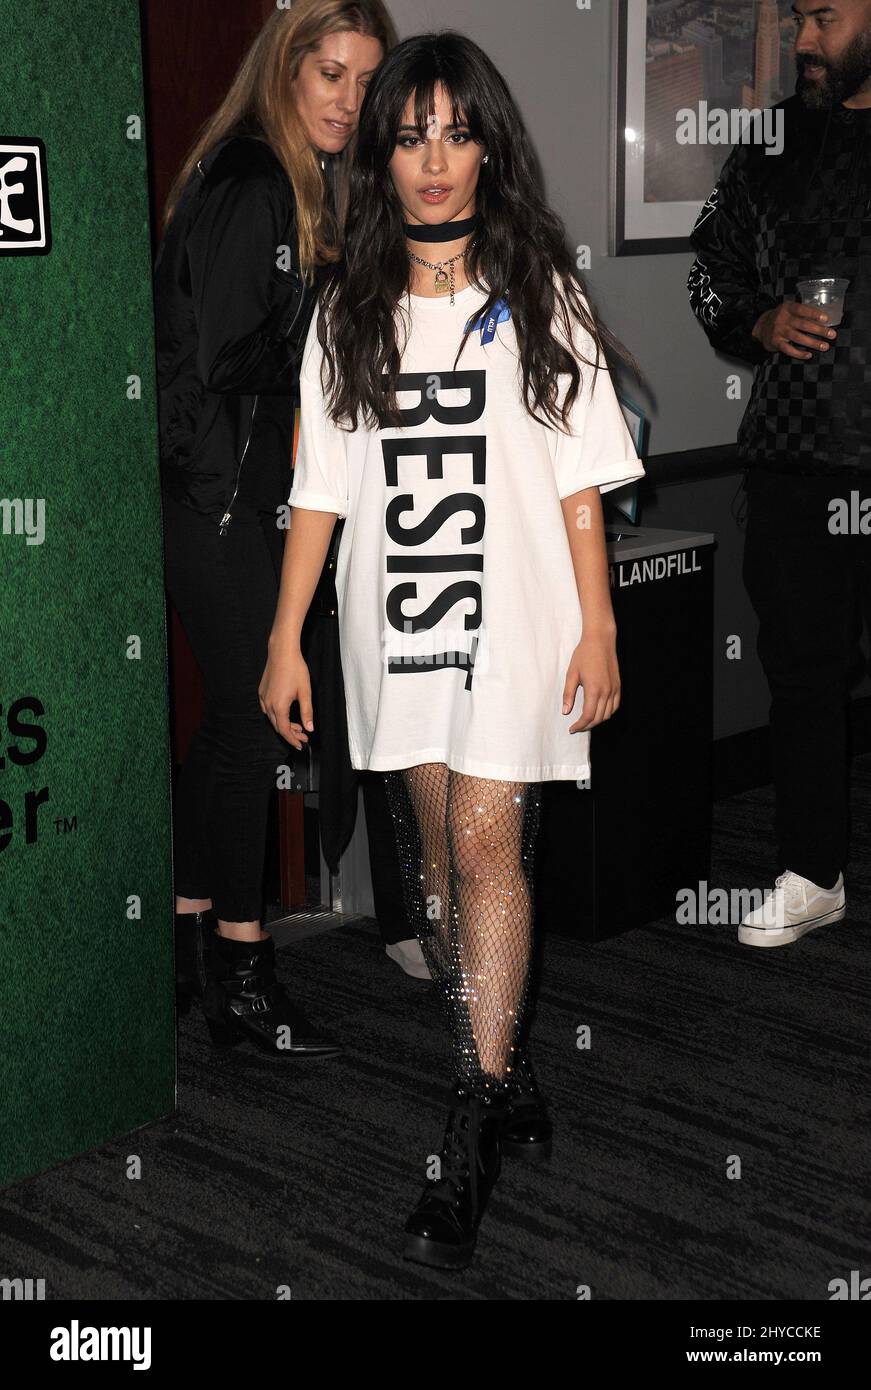 Camila Cabello arriving at the Zedd Presents ACLU benefit concert held at  Stapler Center Stock Photo - Alamy